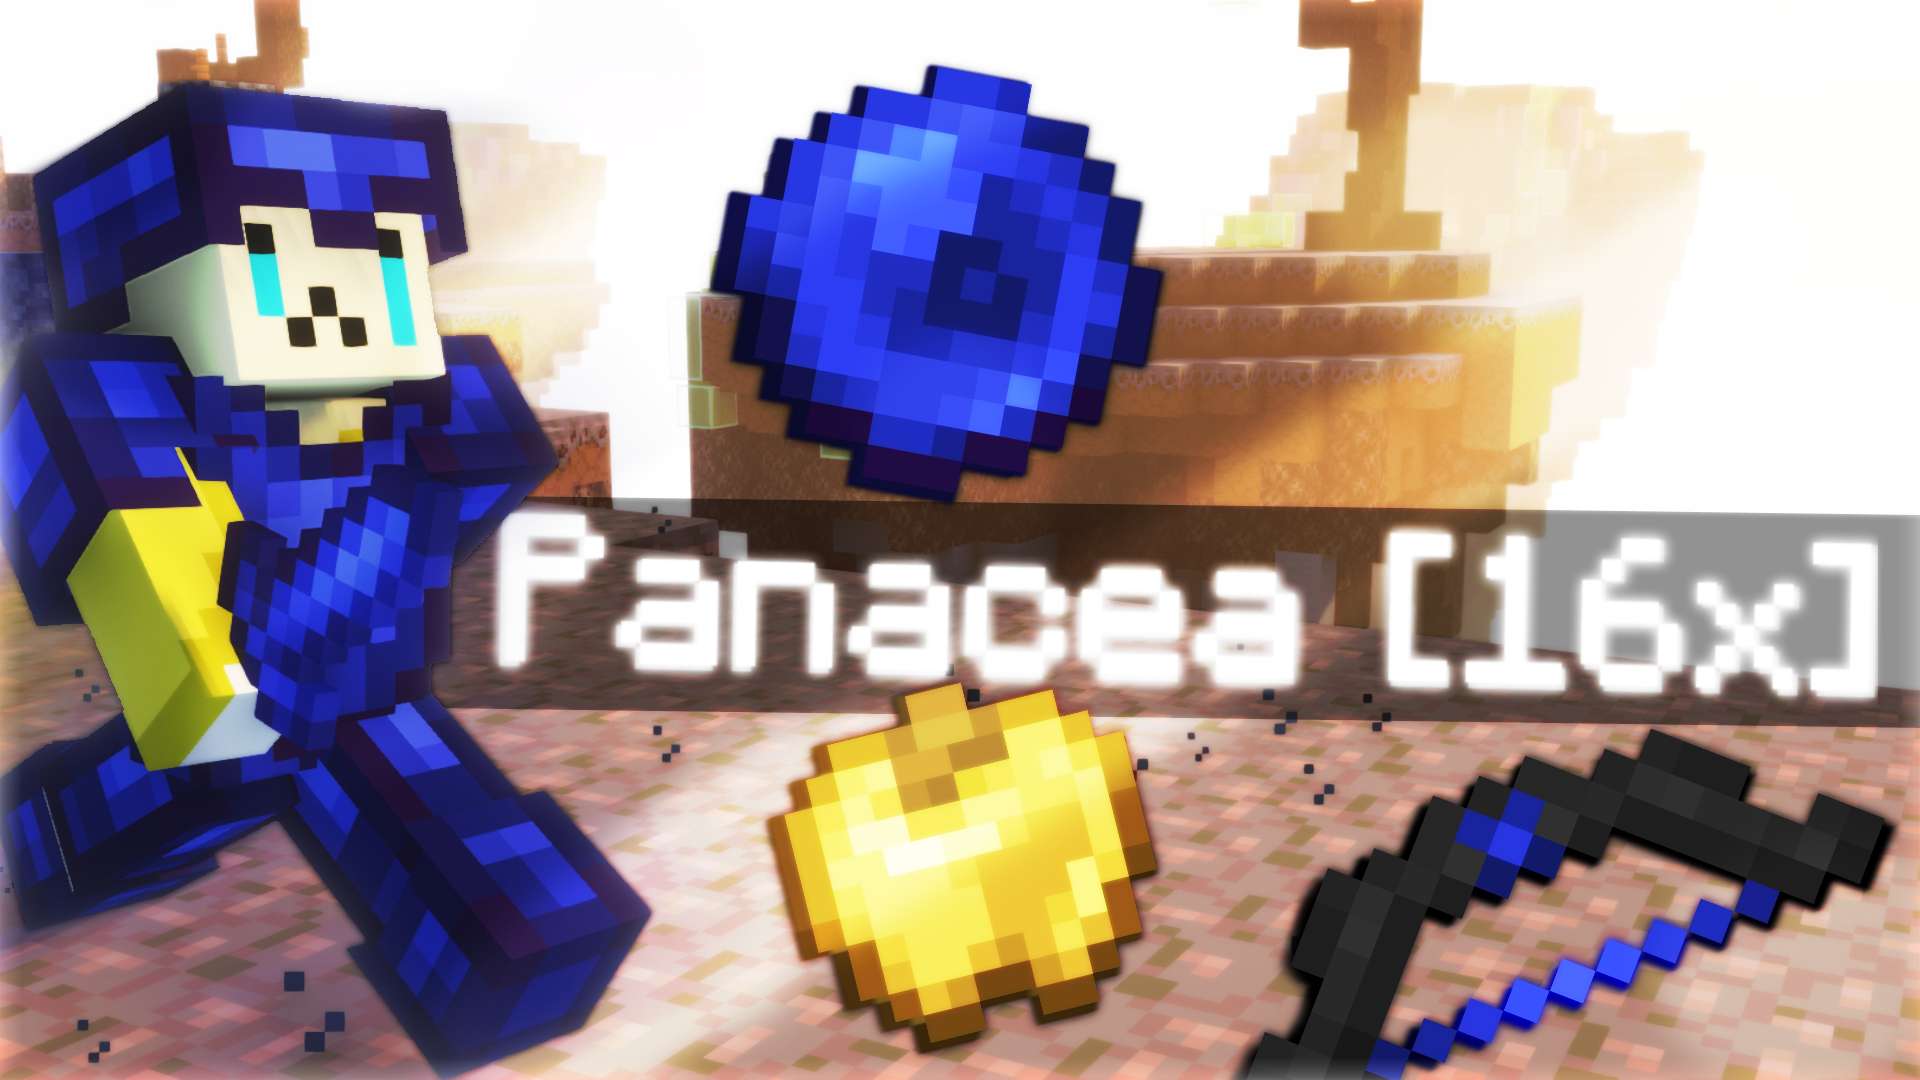 Panacea 16x (collab with Jaxxthatsall_) 16 by Bananess on PvPRP